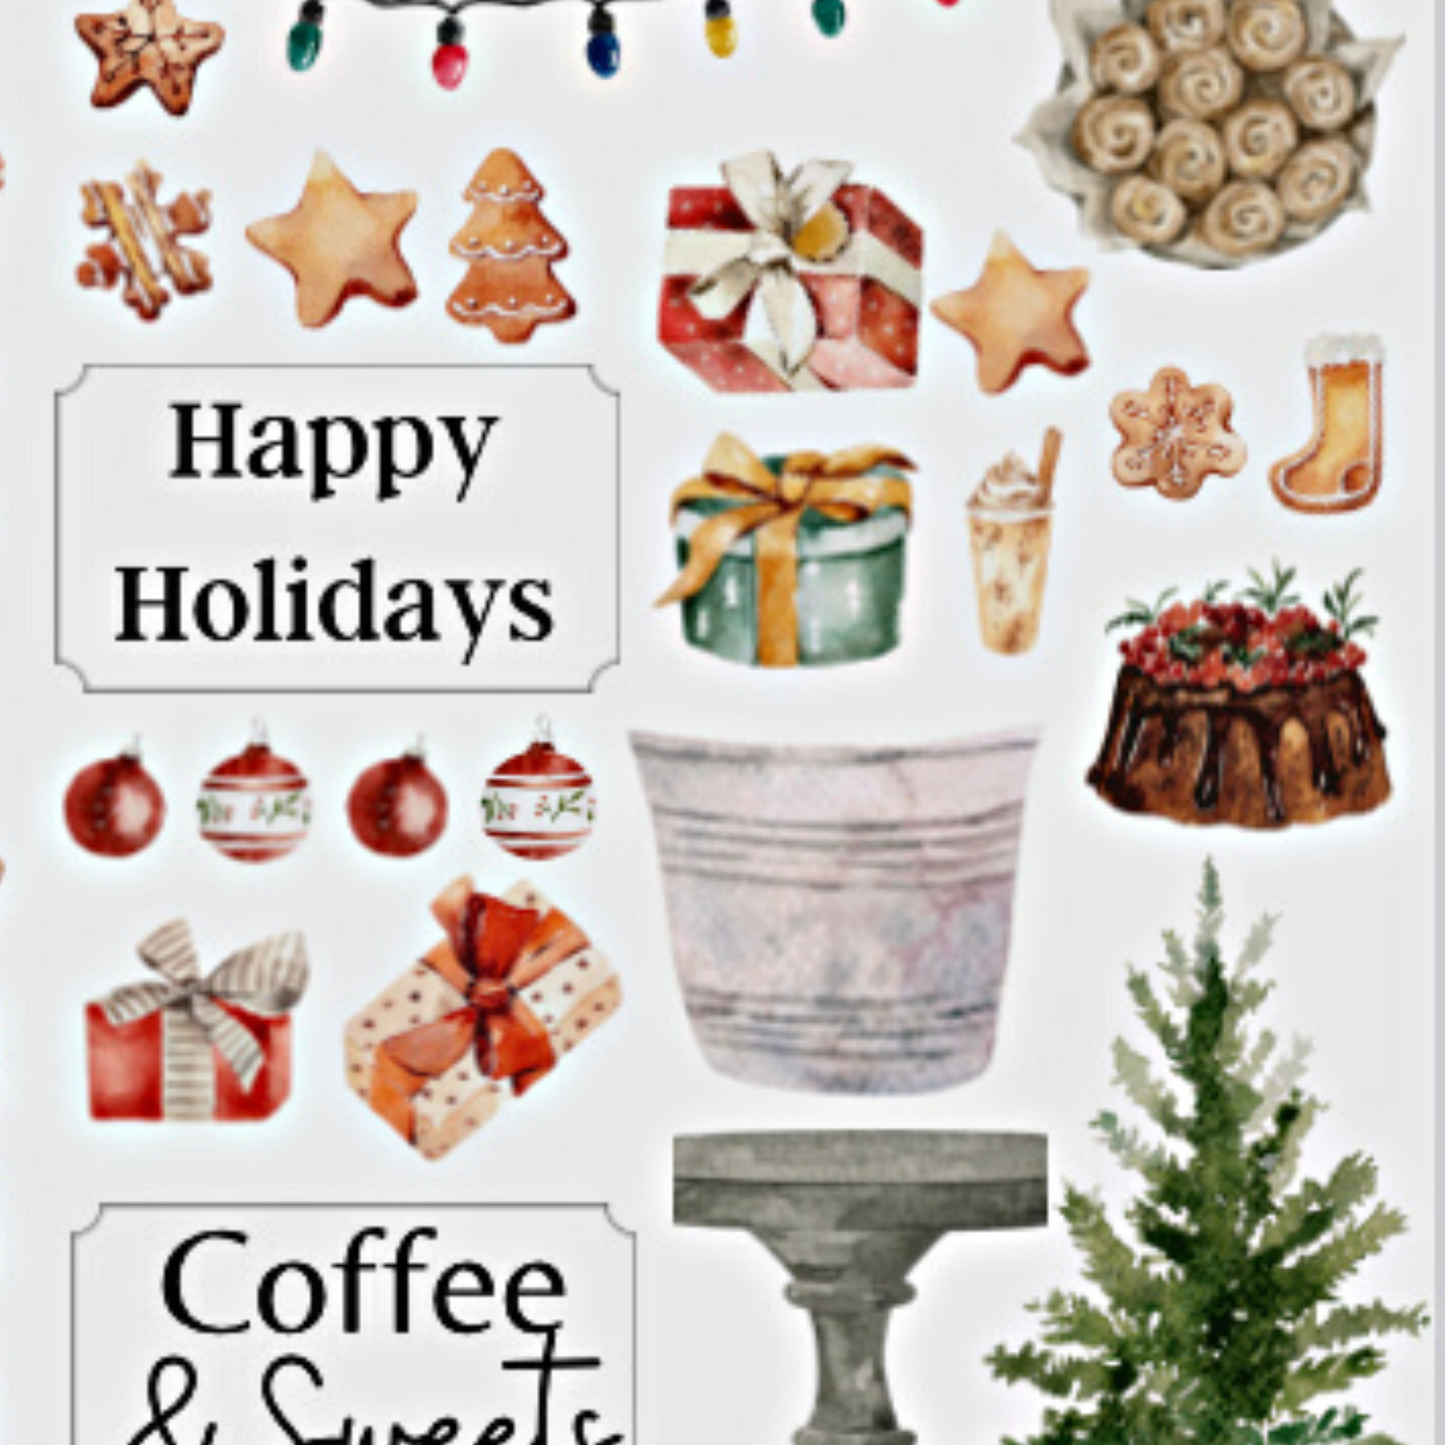 Christmas Bakery Card: All-In-One Card Kit, Holiday Cards DIY, Kits for kids, preteens & teens